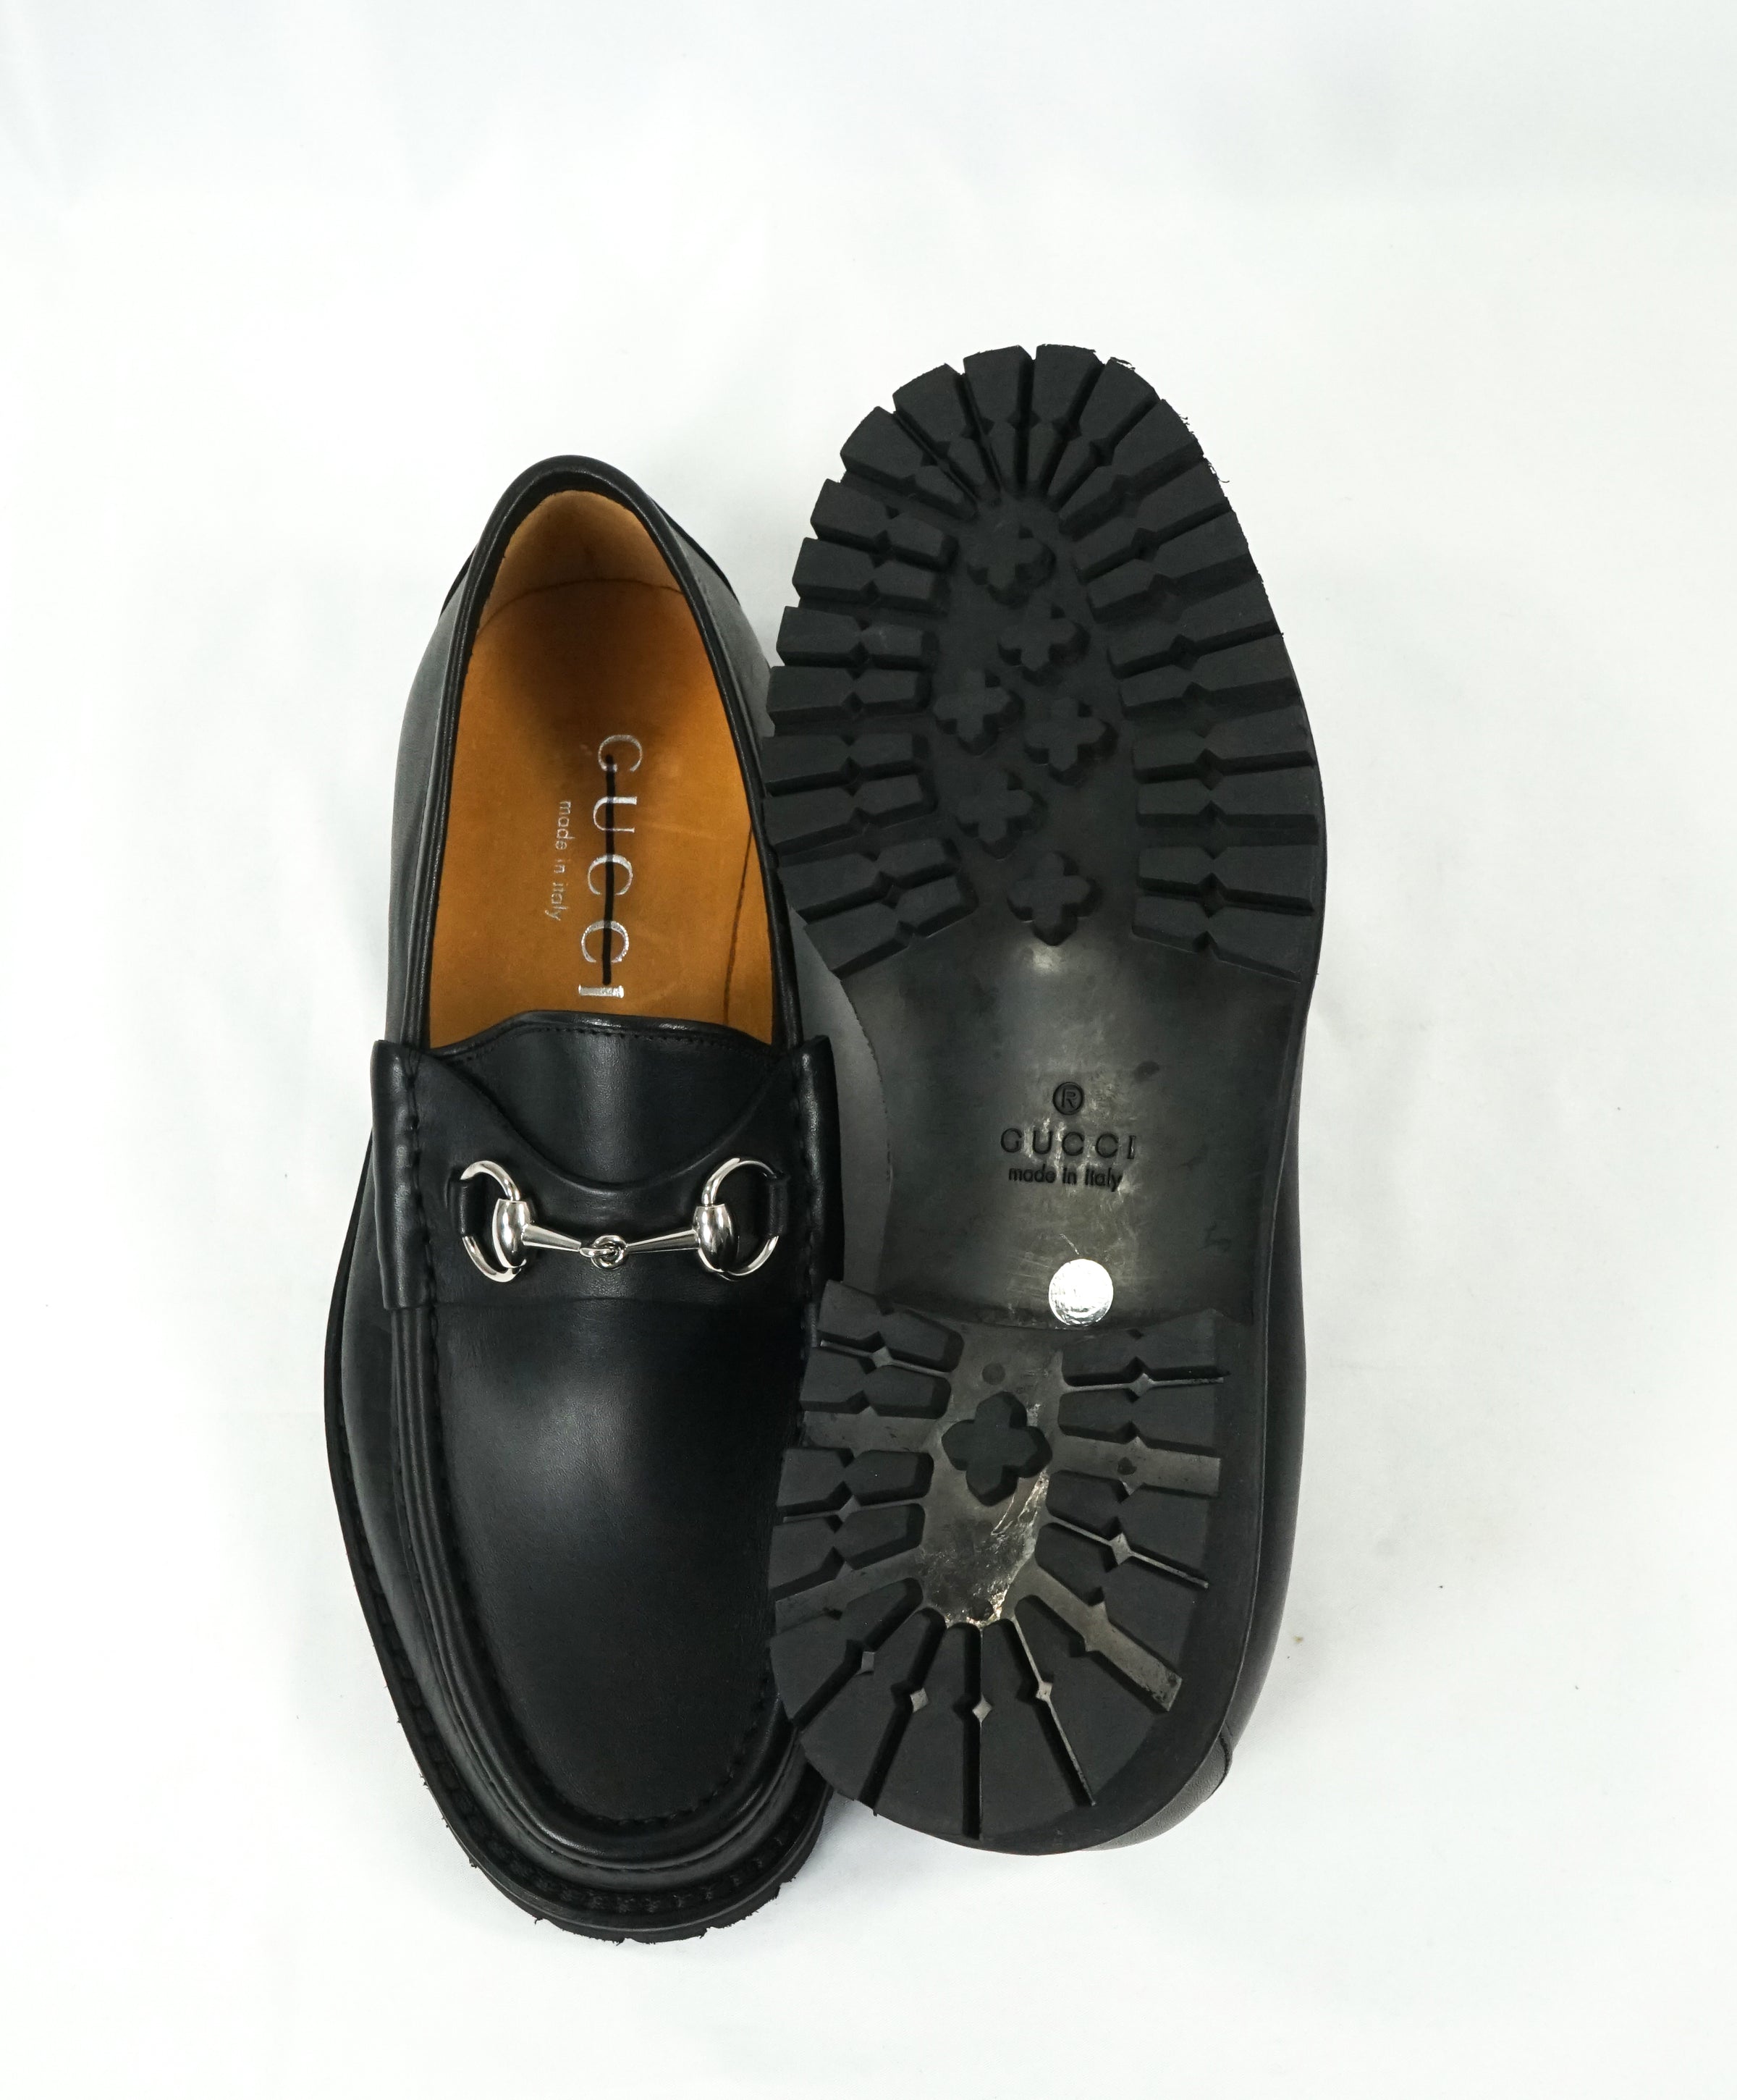 GUCCI - Horse-bit Lug Sole Loafers Black Iconic Style - 8.5 – Luxe Hanger